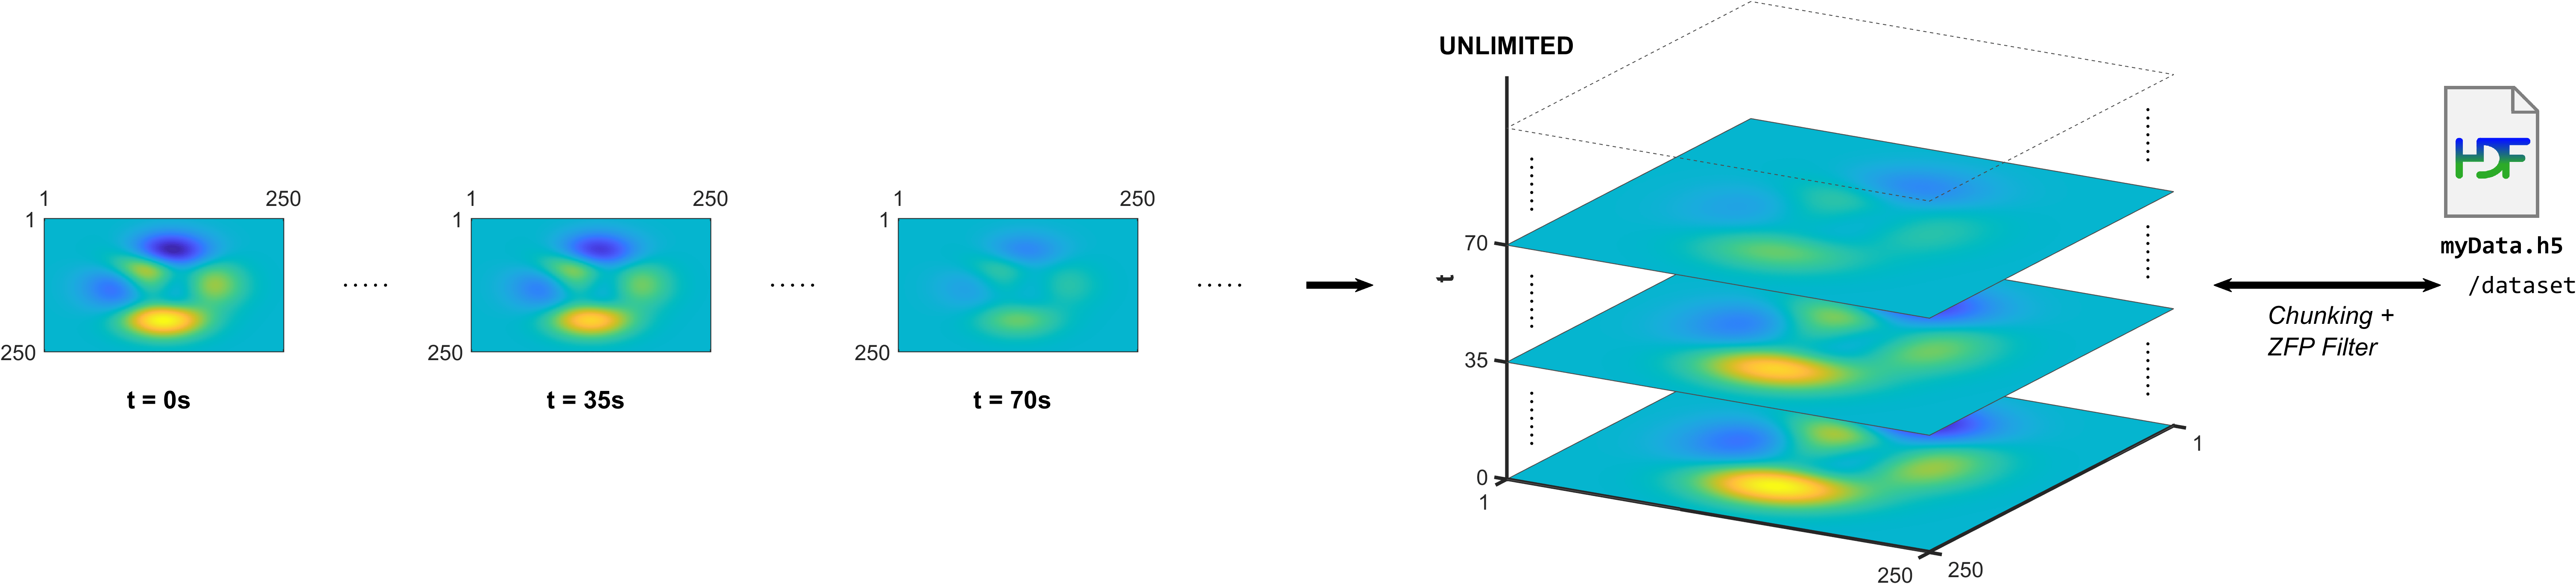 Time series of 2-D arrays that changes with time, shown as a 3-D plot with an unlimited third dimension